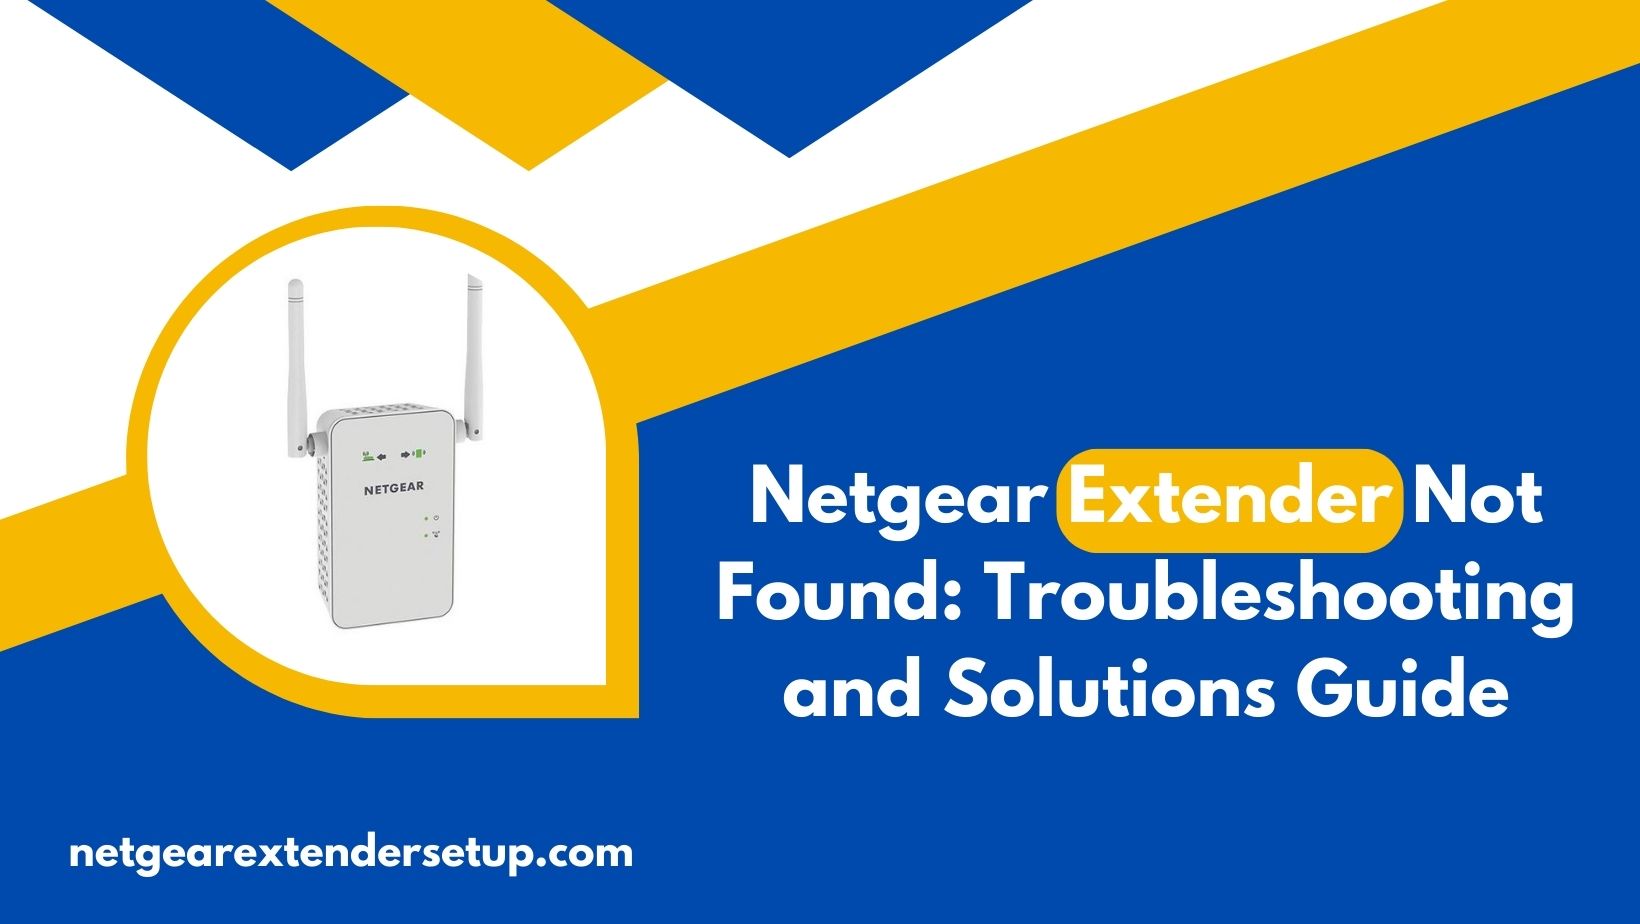 You are currently viewing Netgear Extender Not Found: Troubleshooting and Solutions Guide